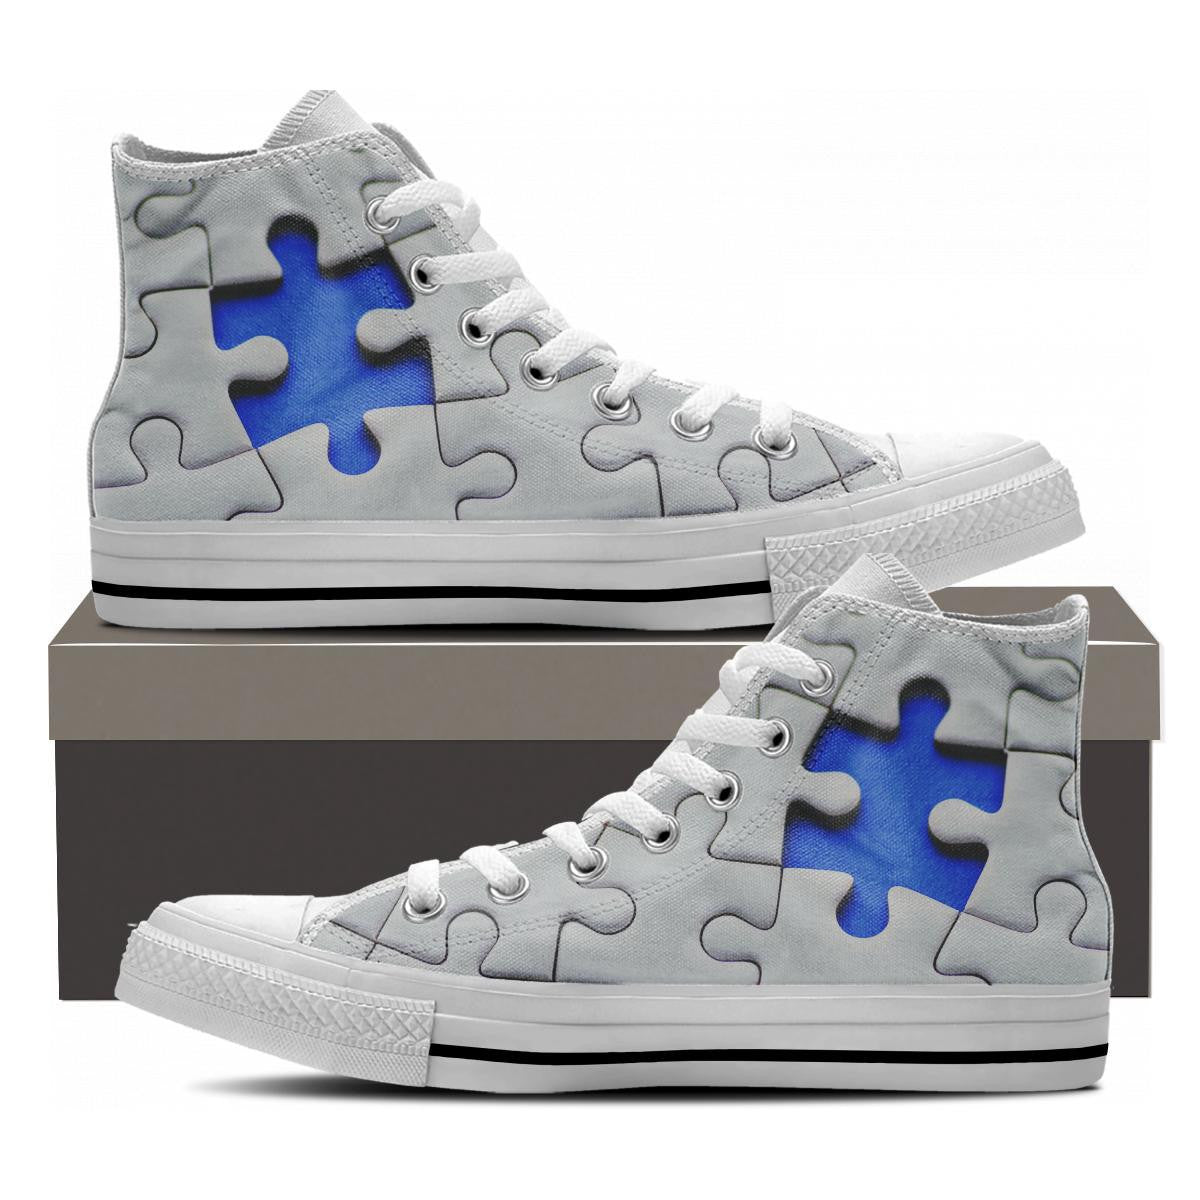 Autism Awareness High Tops - Cool Tees and Things